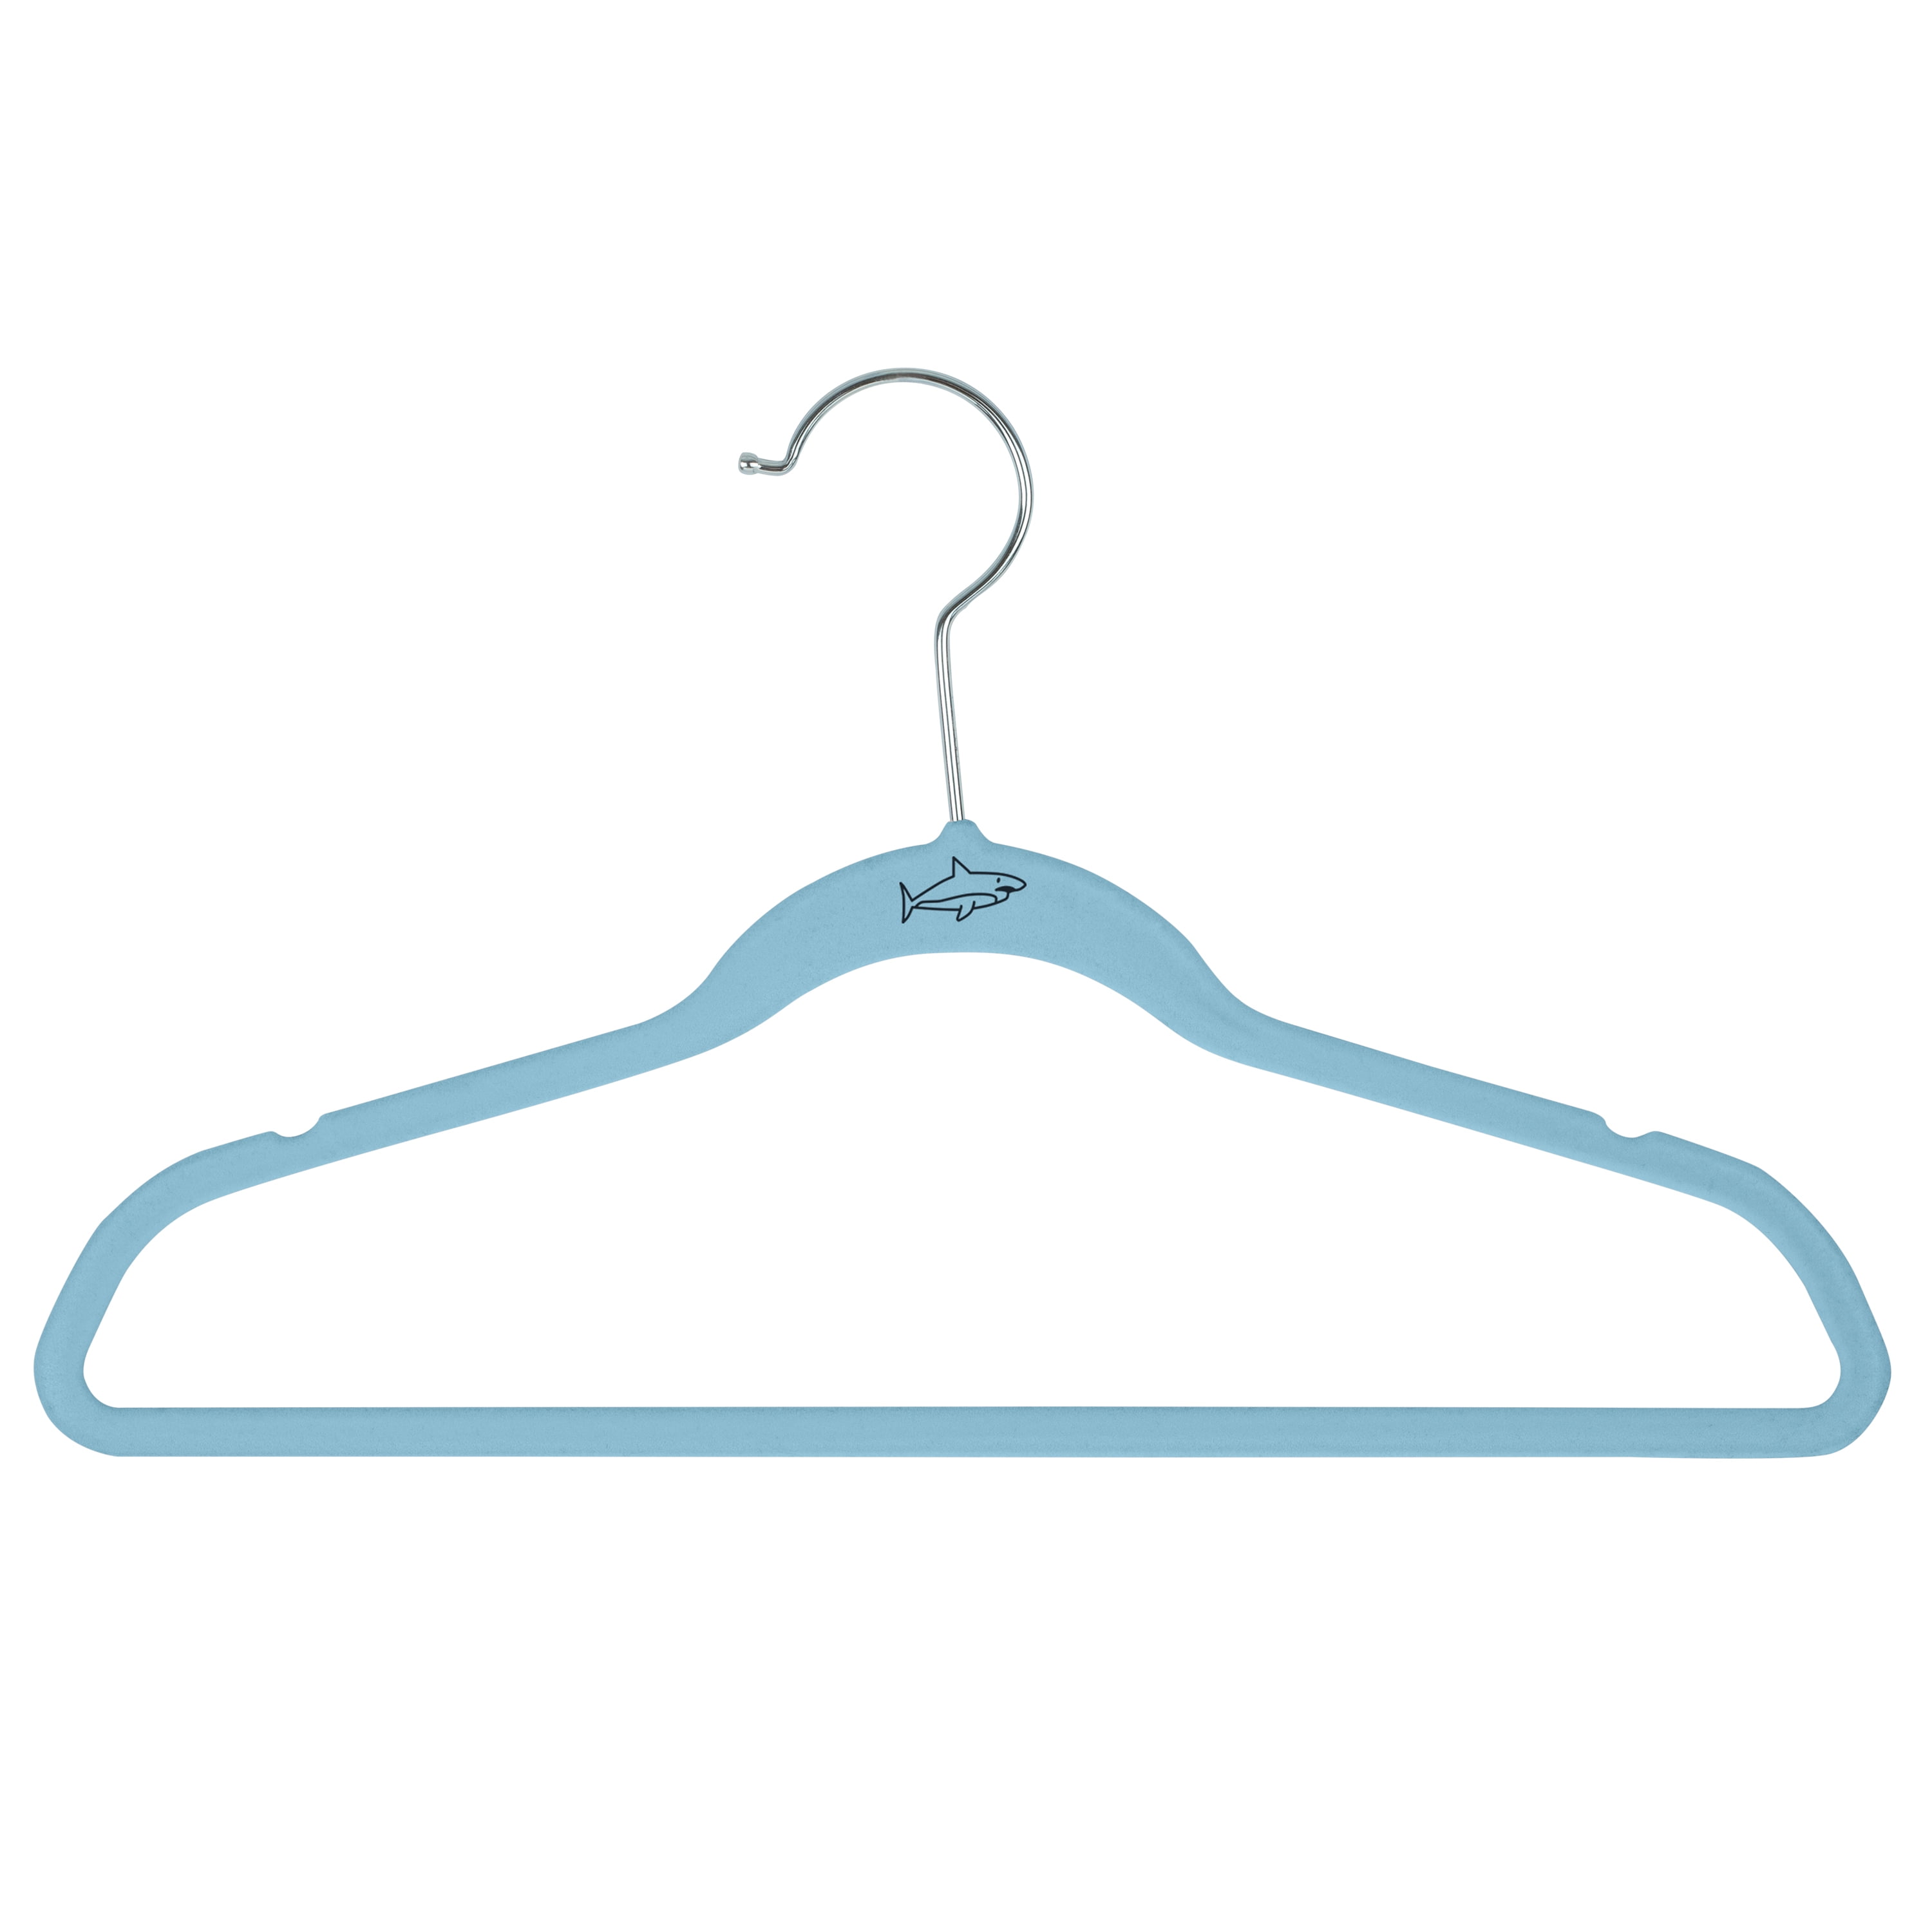  24-Pack Light Blue Velvet Hangers with Movable Clips for Baby  and Kids Clothes, Slip-Resistant, Space-Saving for Pants, Leggings, Skirts,  Shorts, Jackets, 360 Degree Swivel Hook (12x8 in) : Home & Kitchen